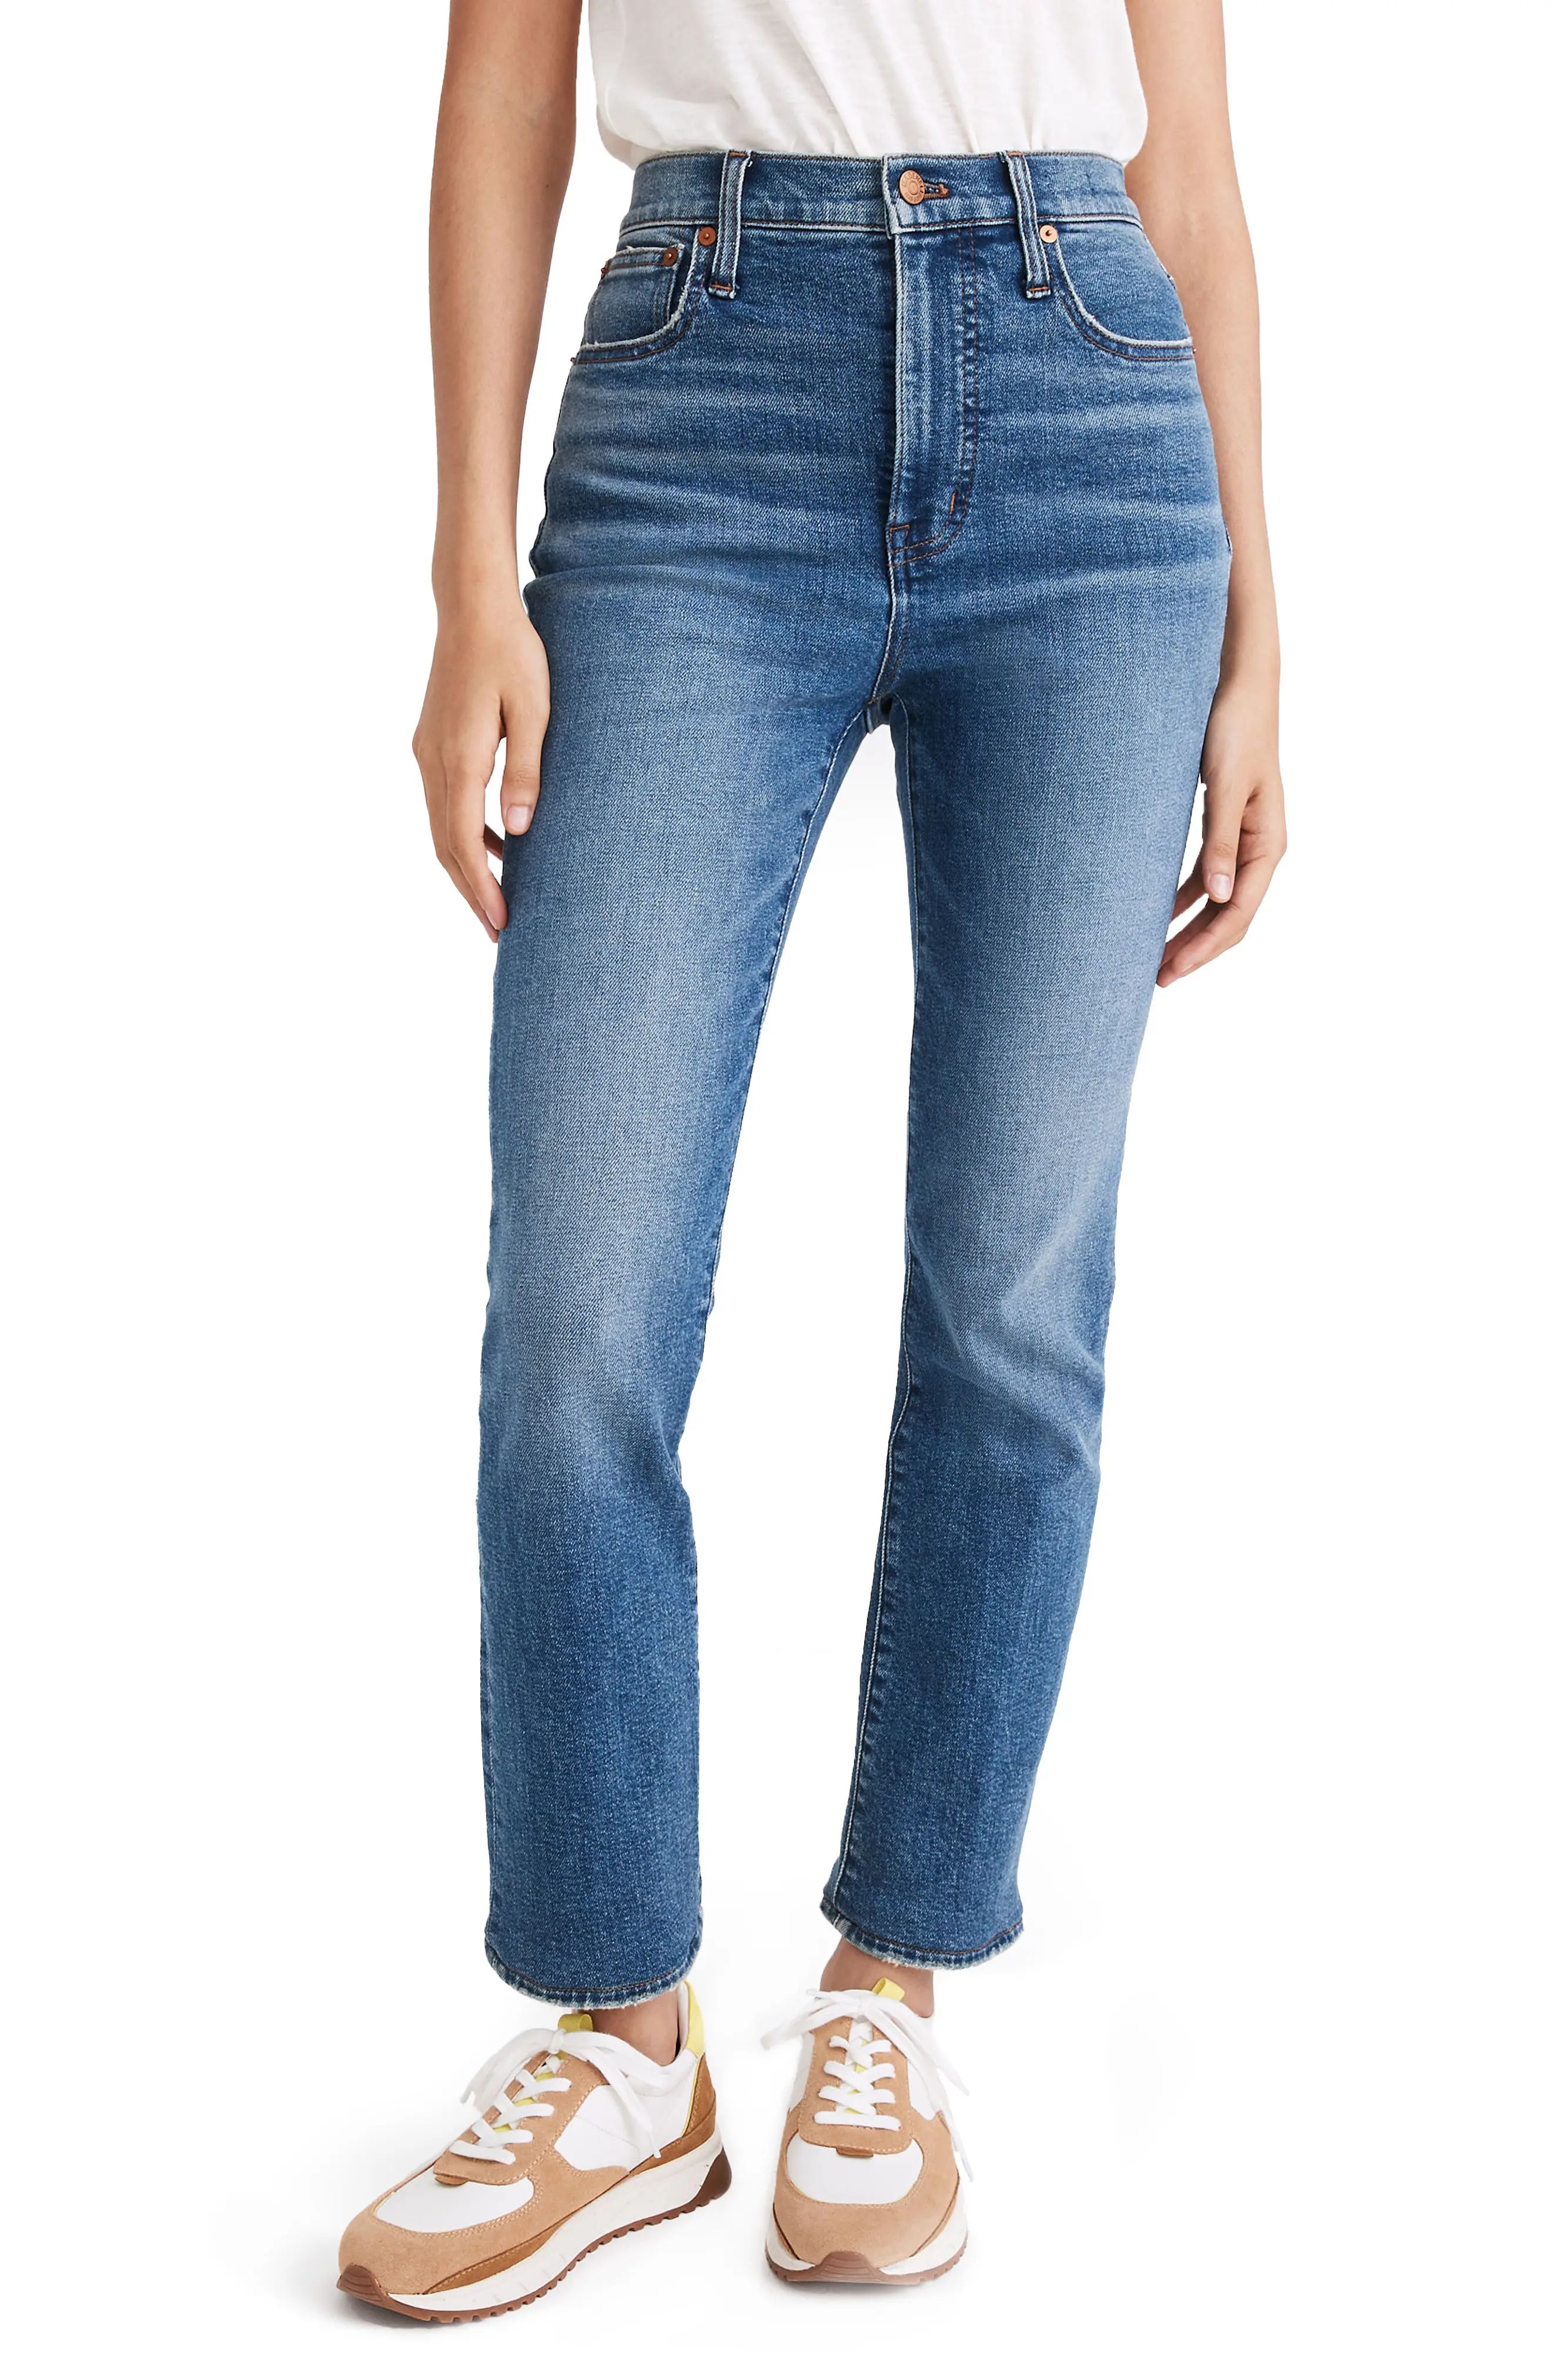 Women's Madewell Slim Demi-Boot Jeans, Size 26 - Blue | Nordstrom